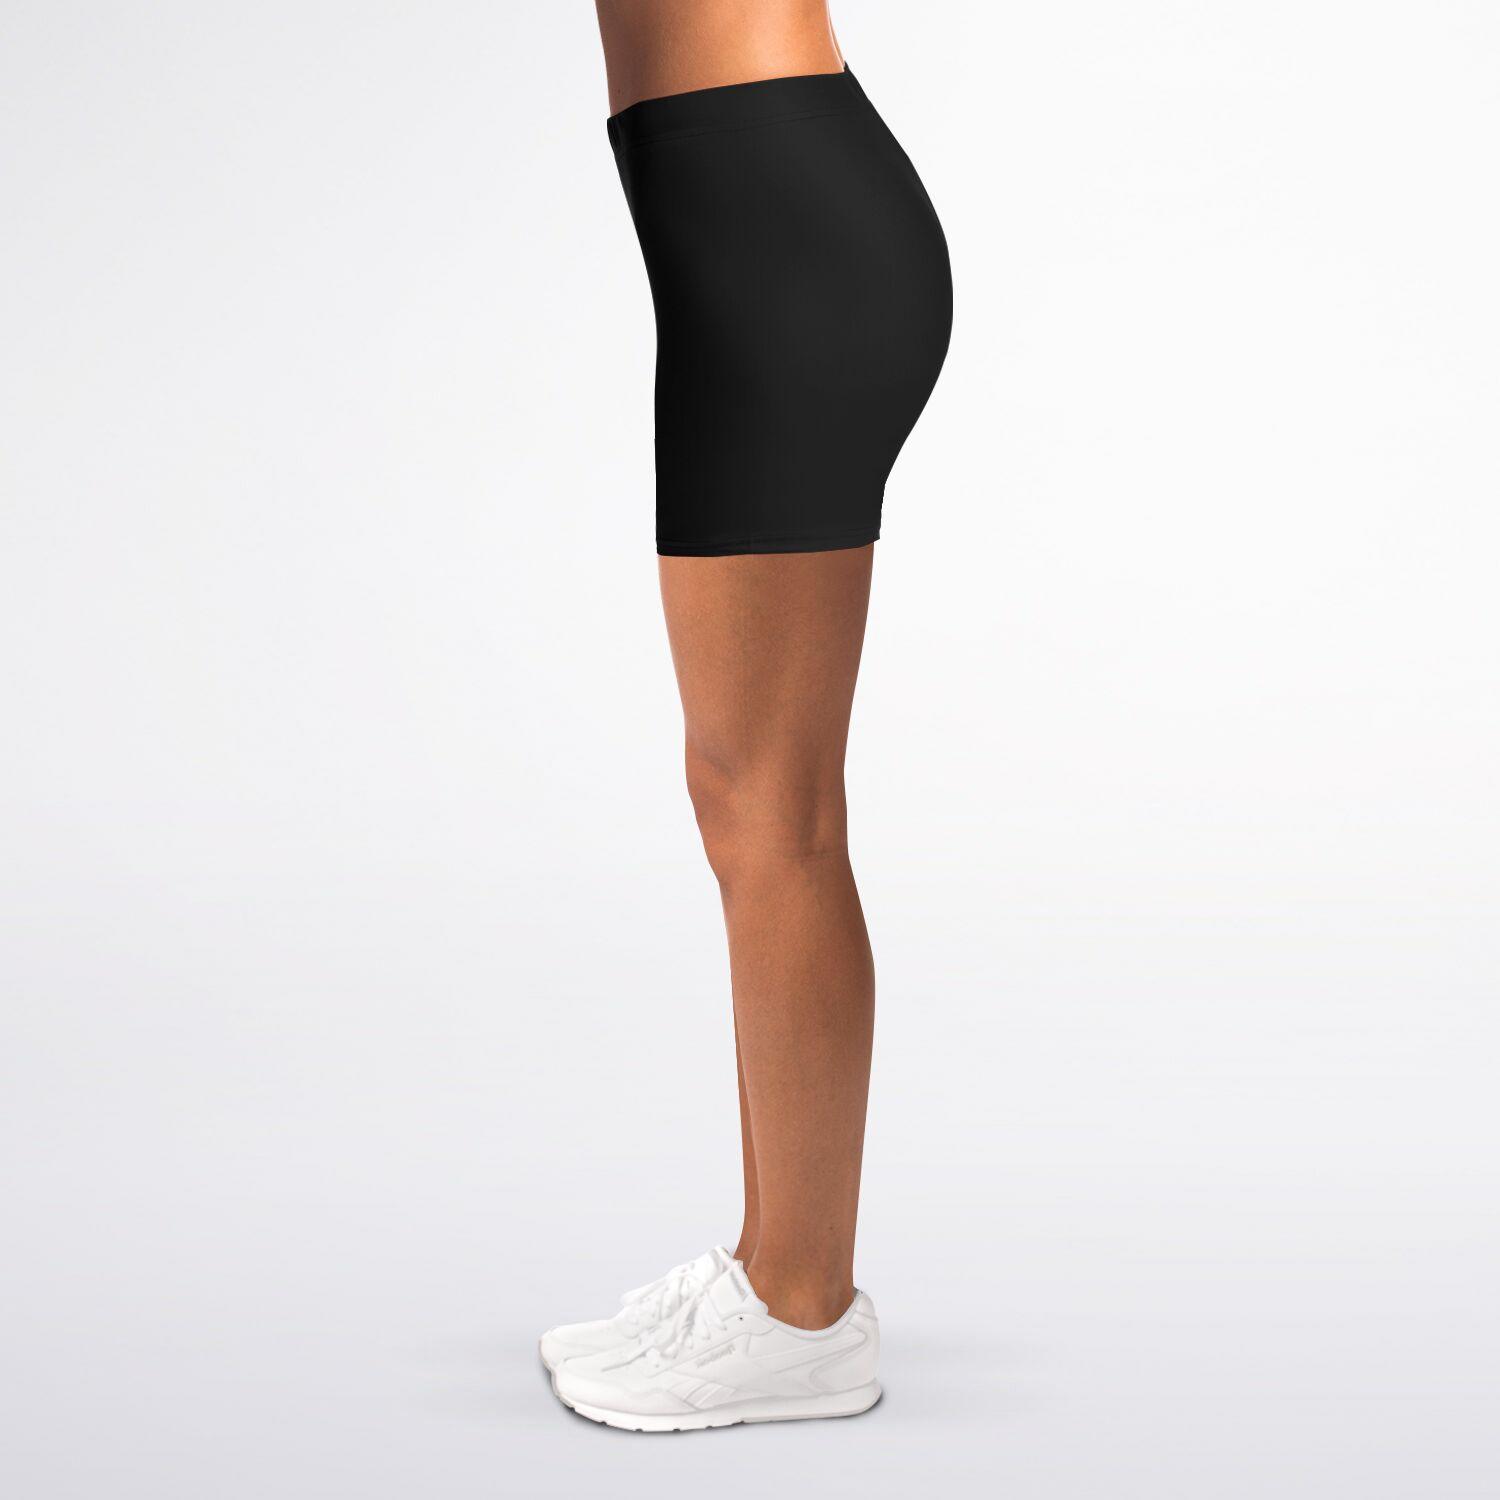 lightweight and comfortable yoga shorts for women - Personal Hour for Yoga and Meditations 